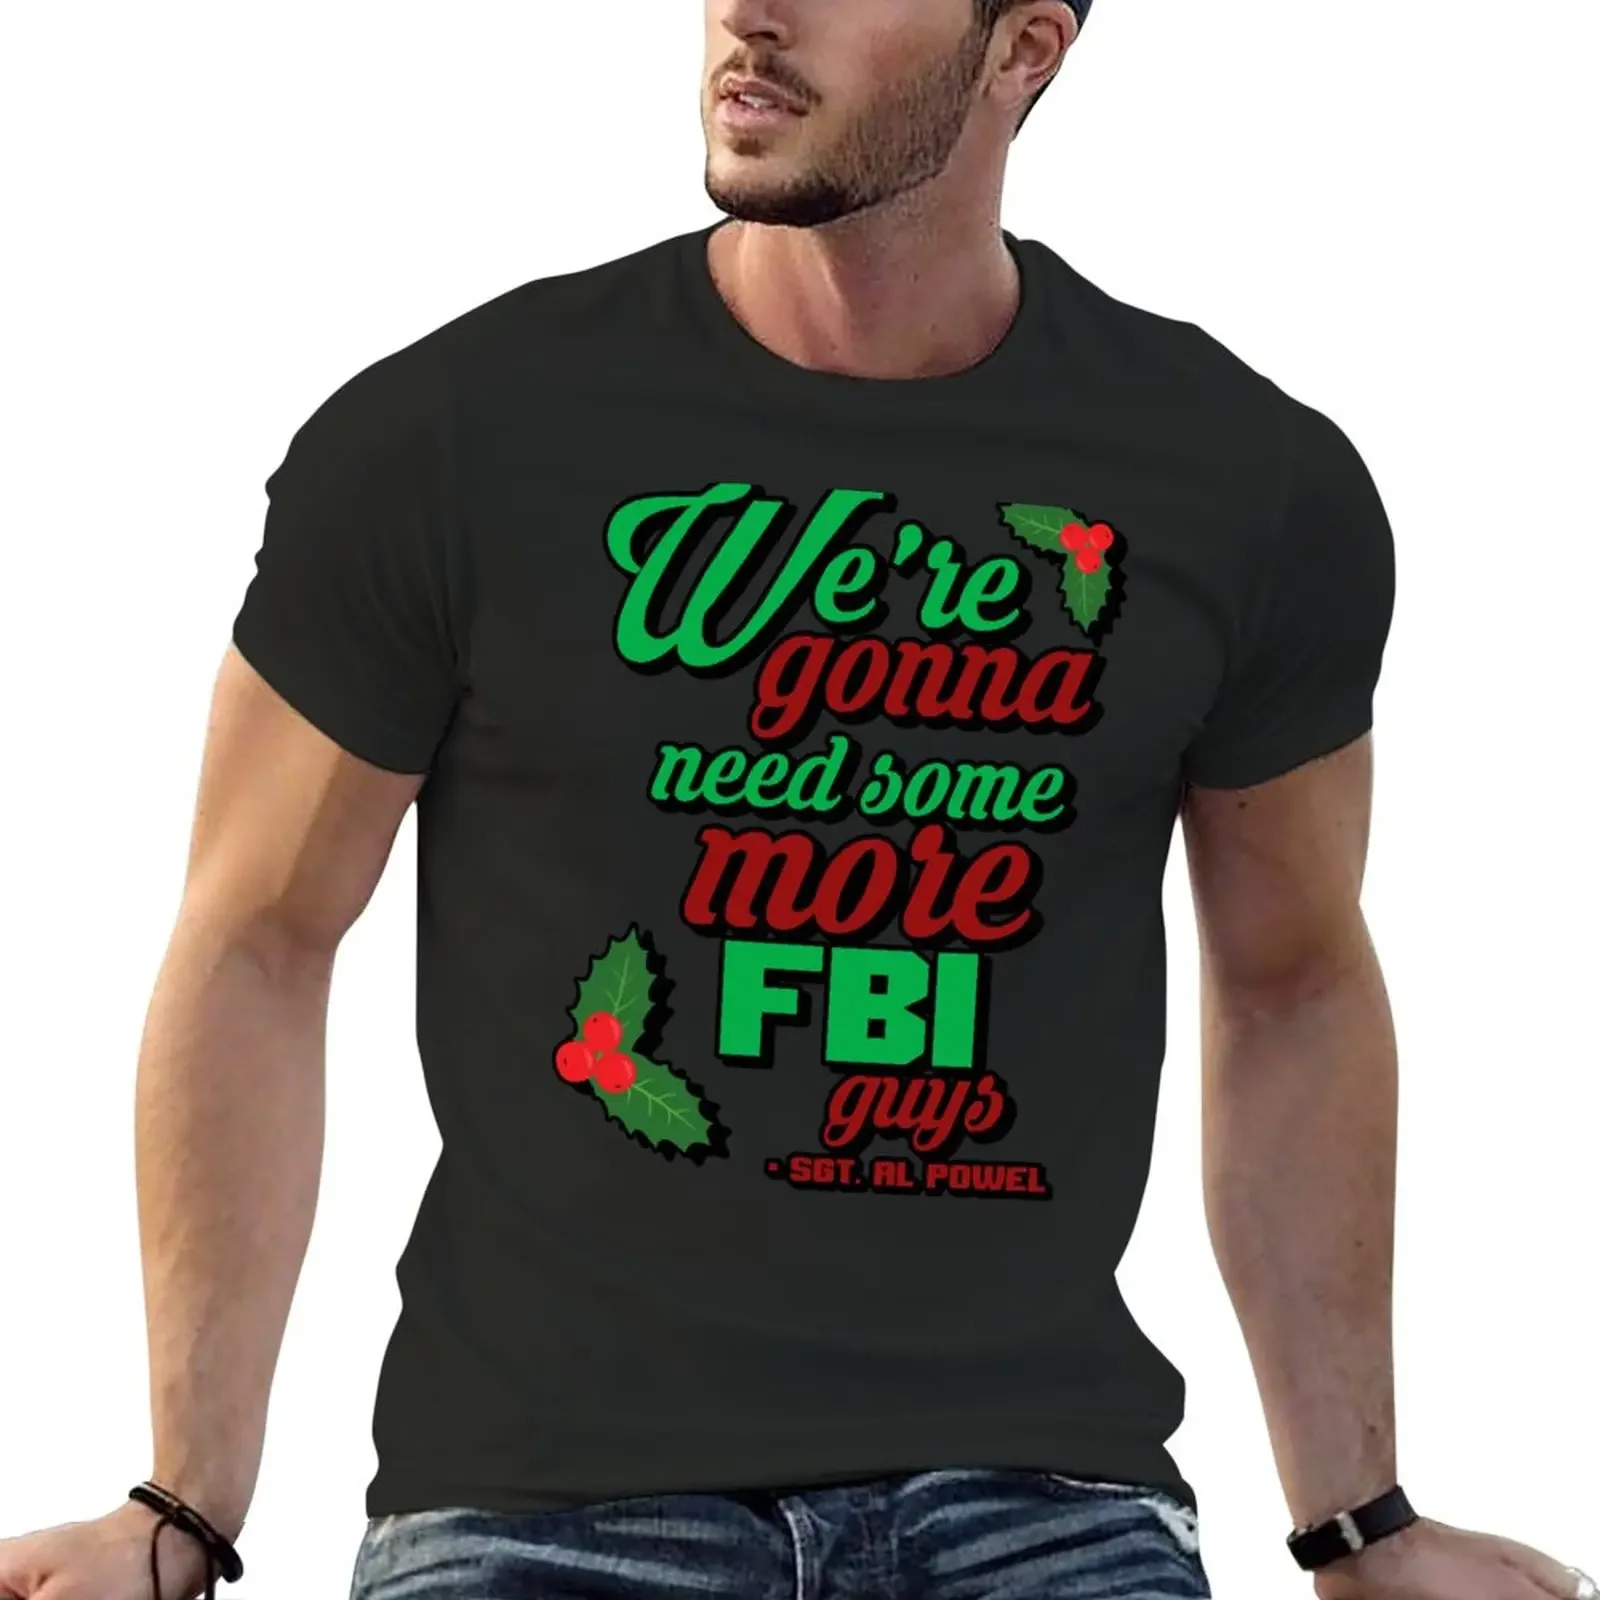 

We're gonna need some more FBI guys. T-Shirt quick drying Short sleeve tee mens t shirts pack